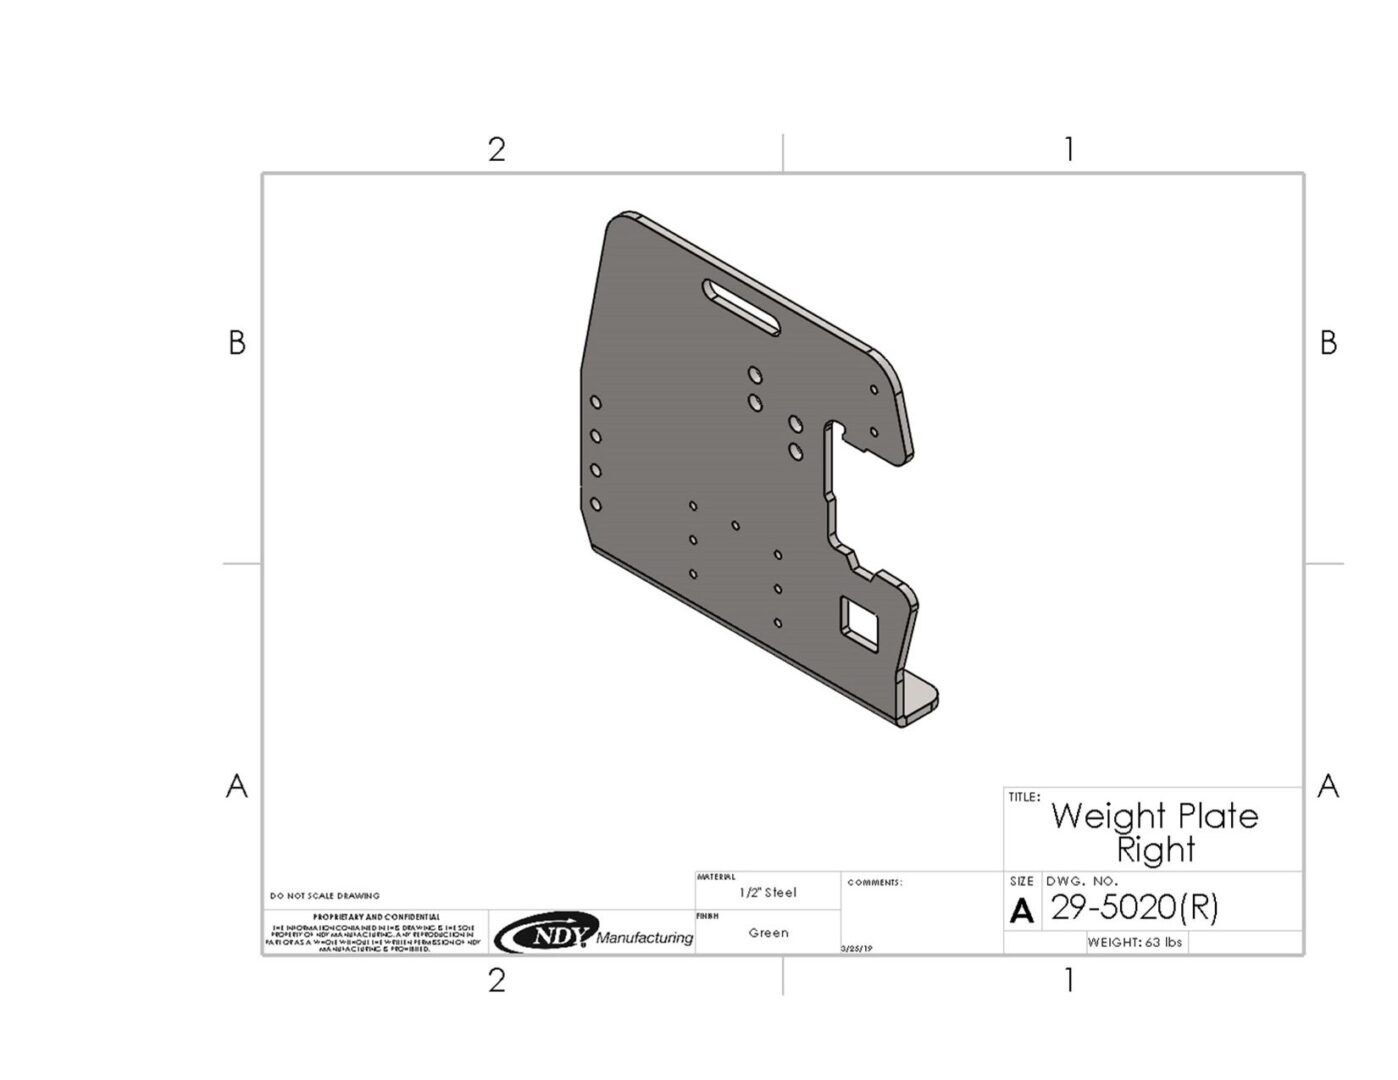 A drawing of a Rock Box Weight Plate, Right - fits John Deere for a vehicle.